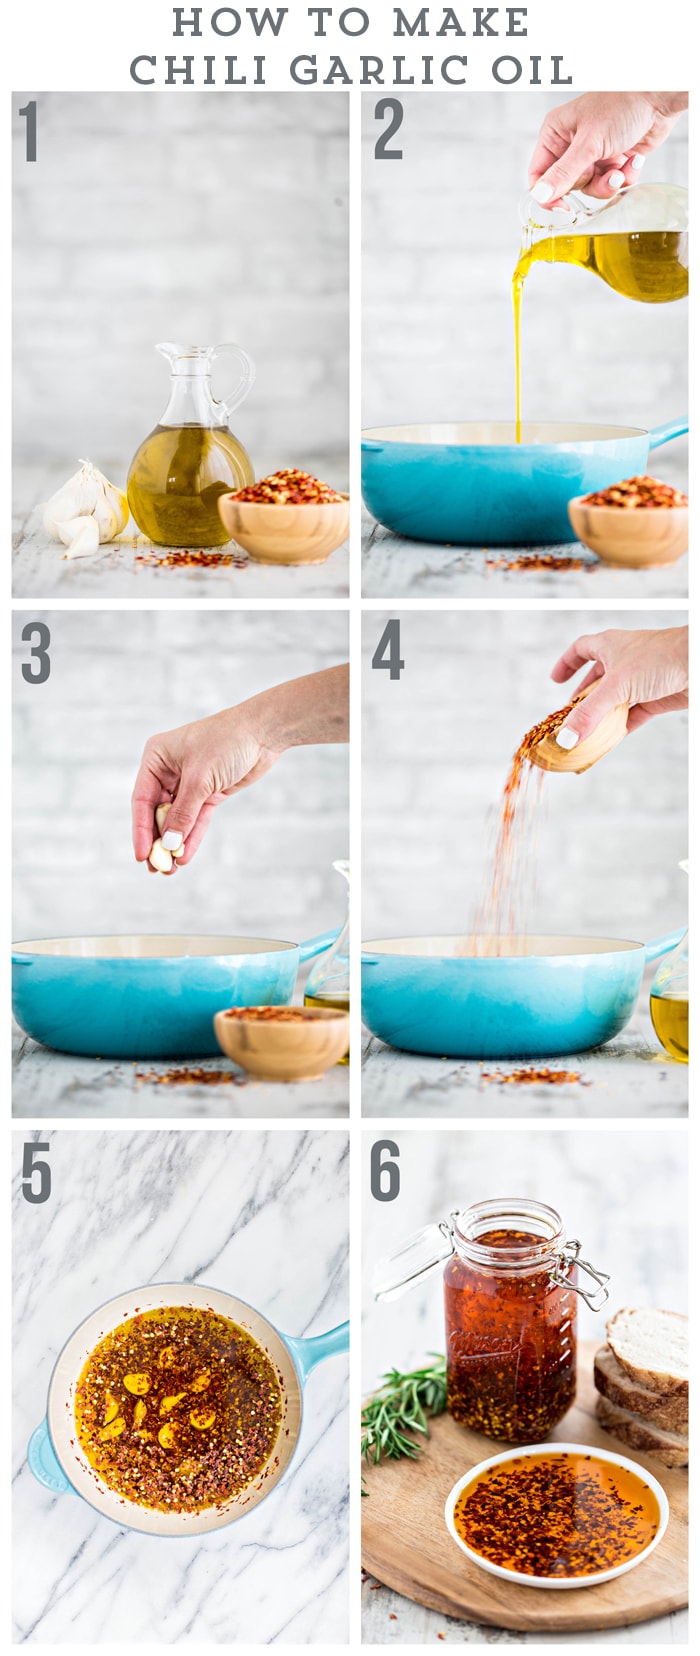 step by step images how to make chili garlic oil